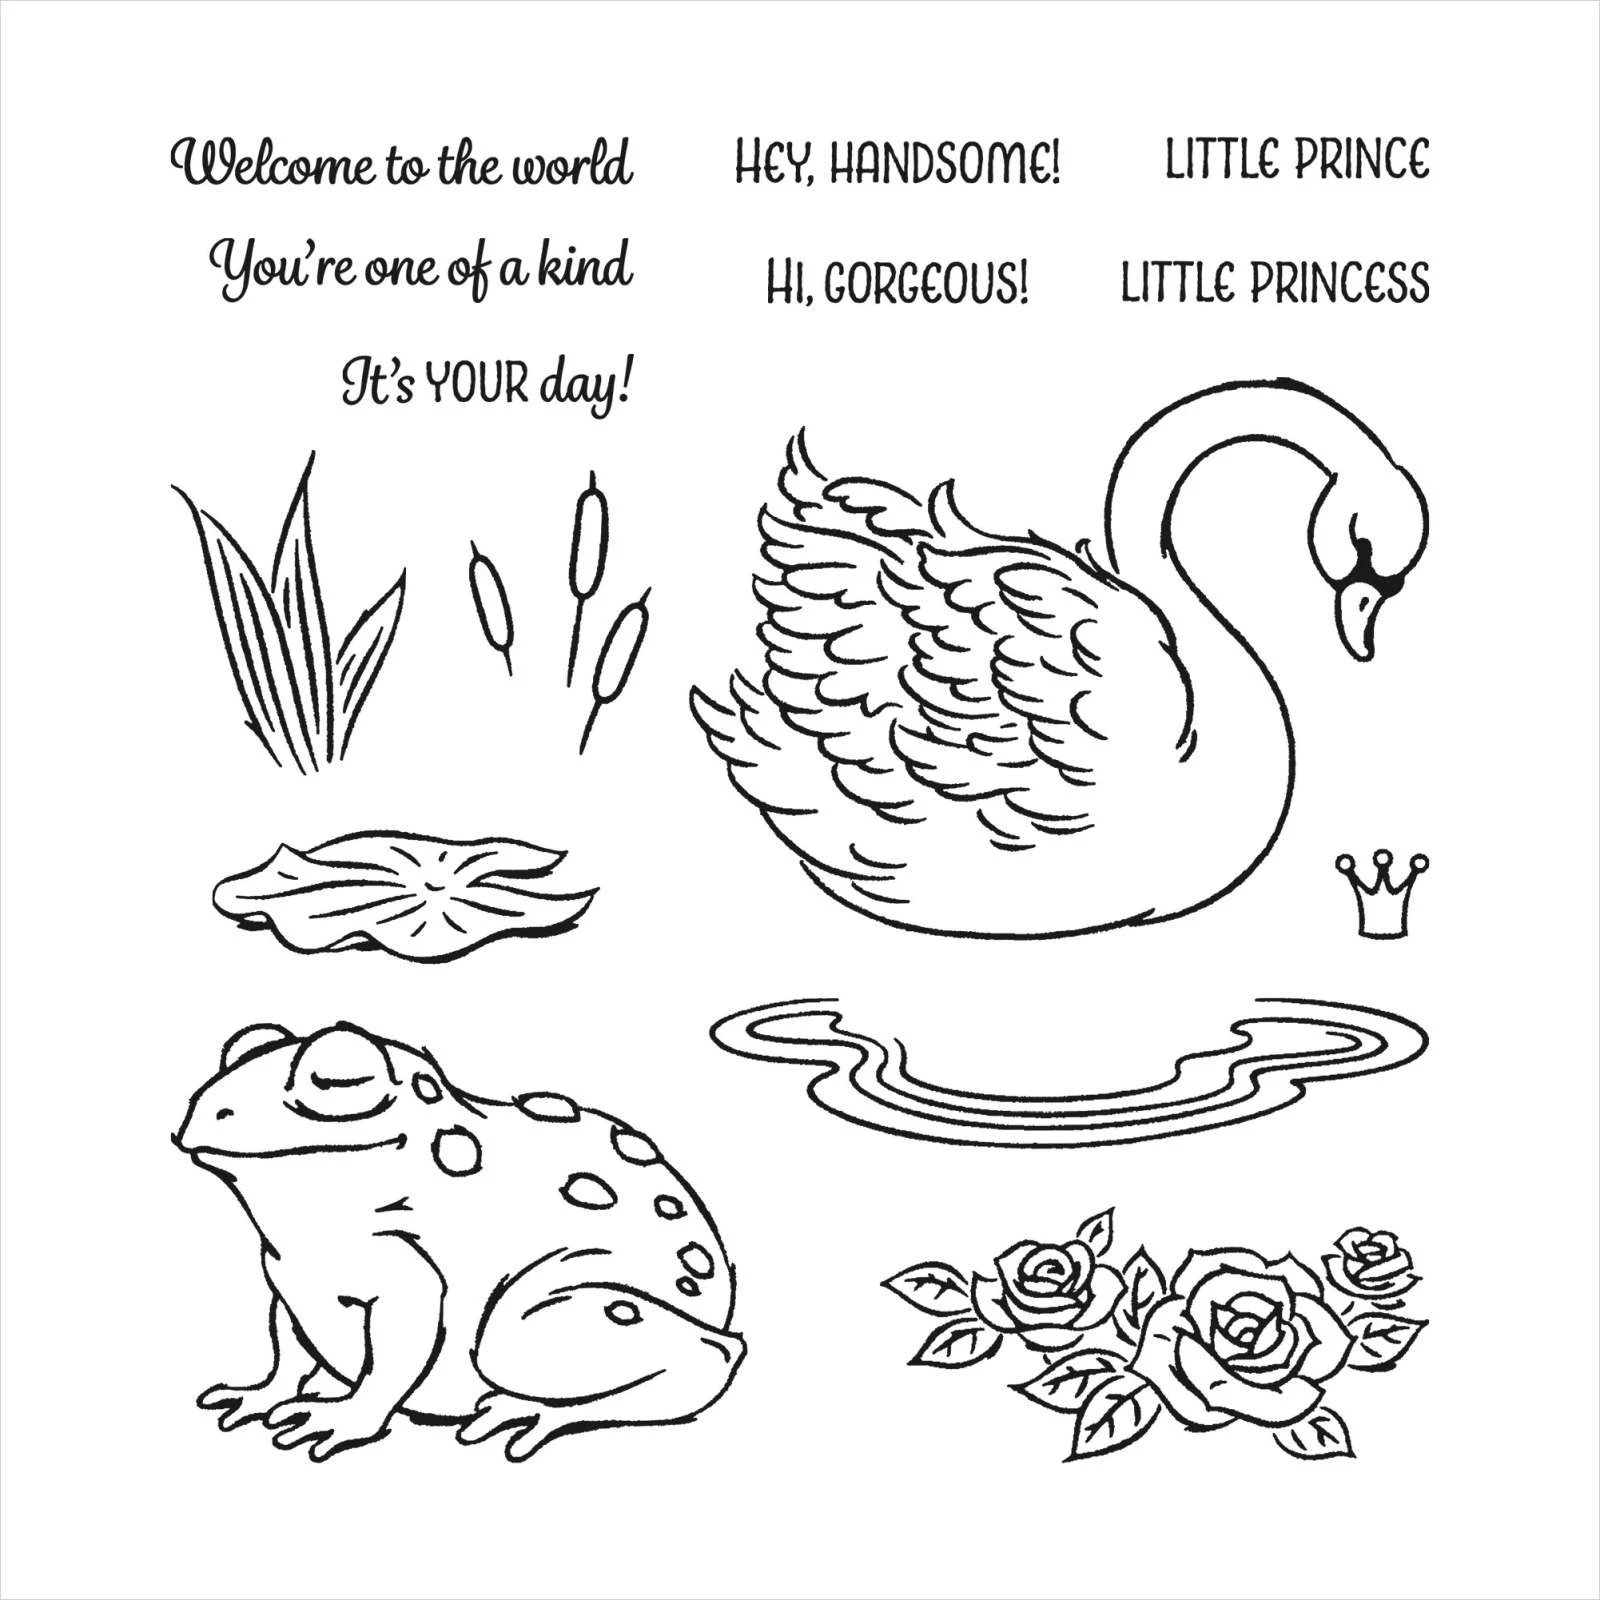 

Frog prince Swan Princess New Metal Cutting Dies & Stamps Scrapbook Dary Decoration Stencil Embossing Template DIY Greeting Card